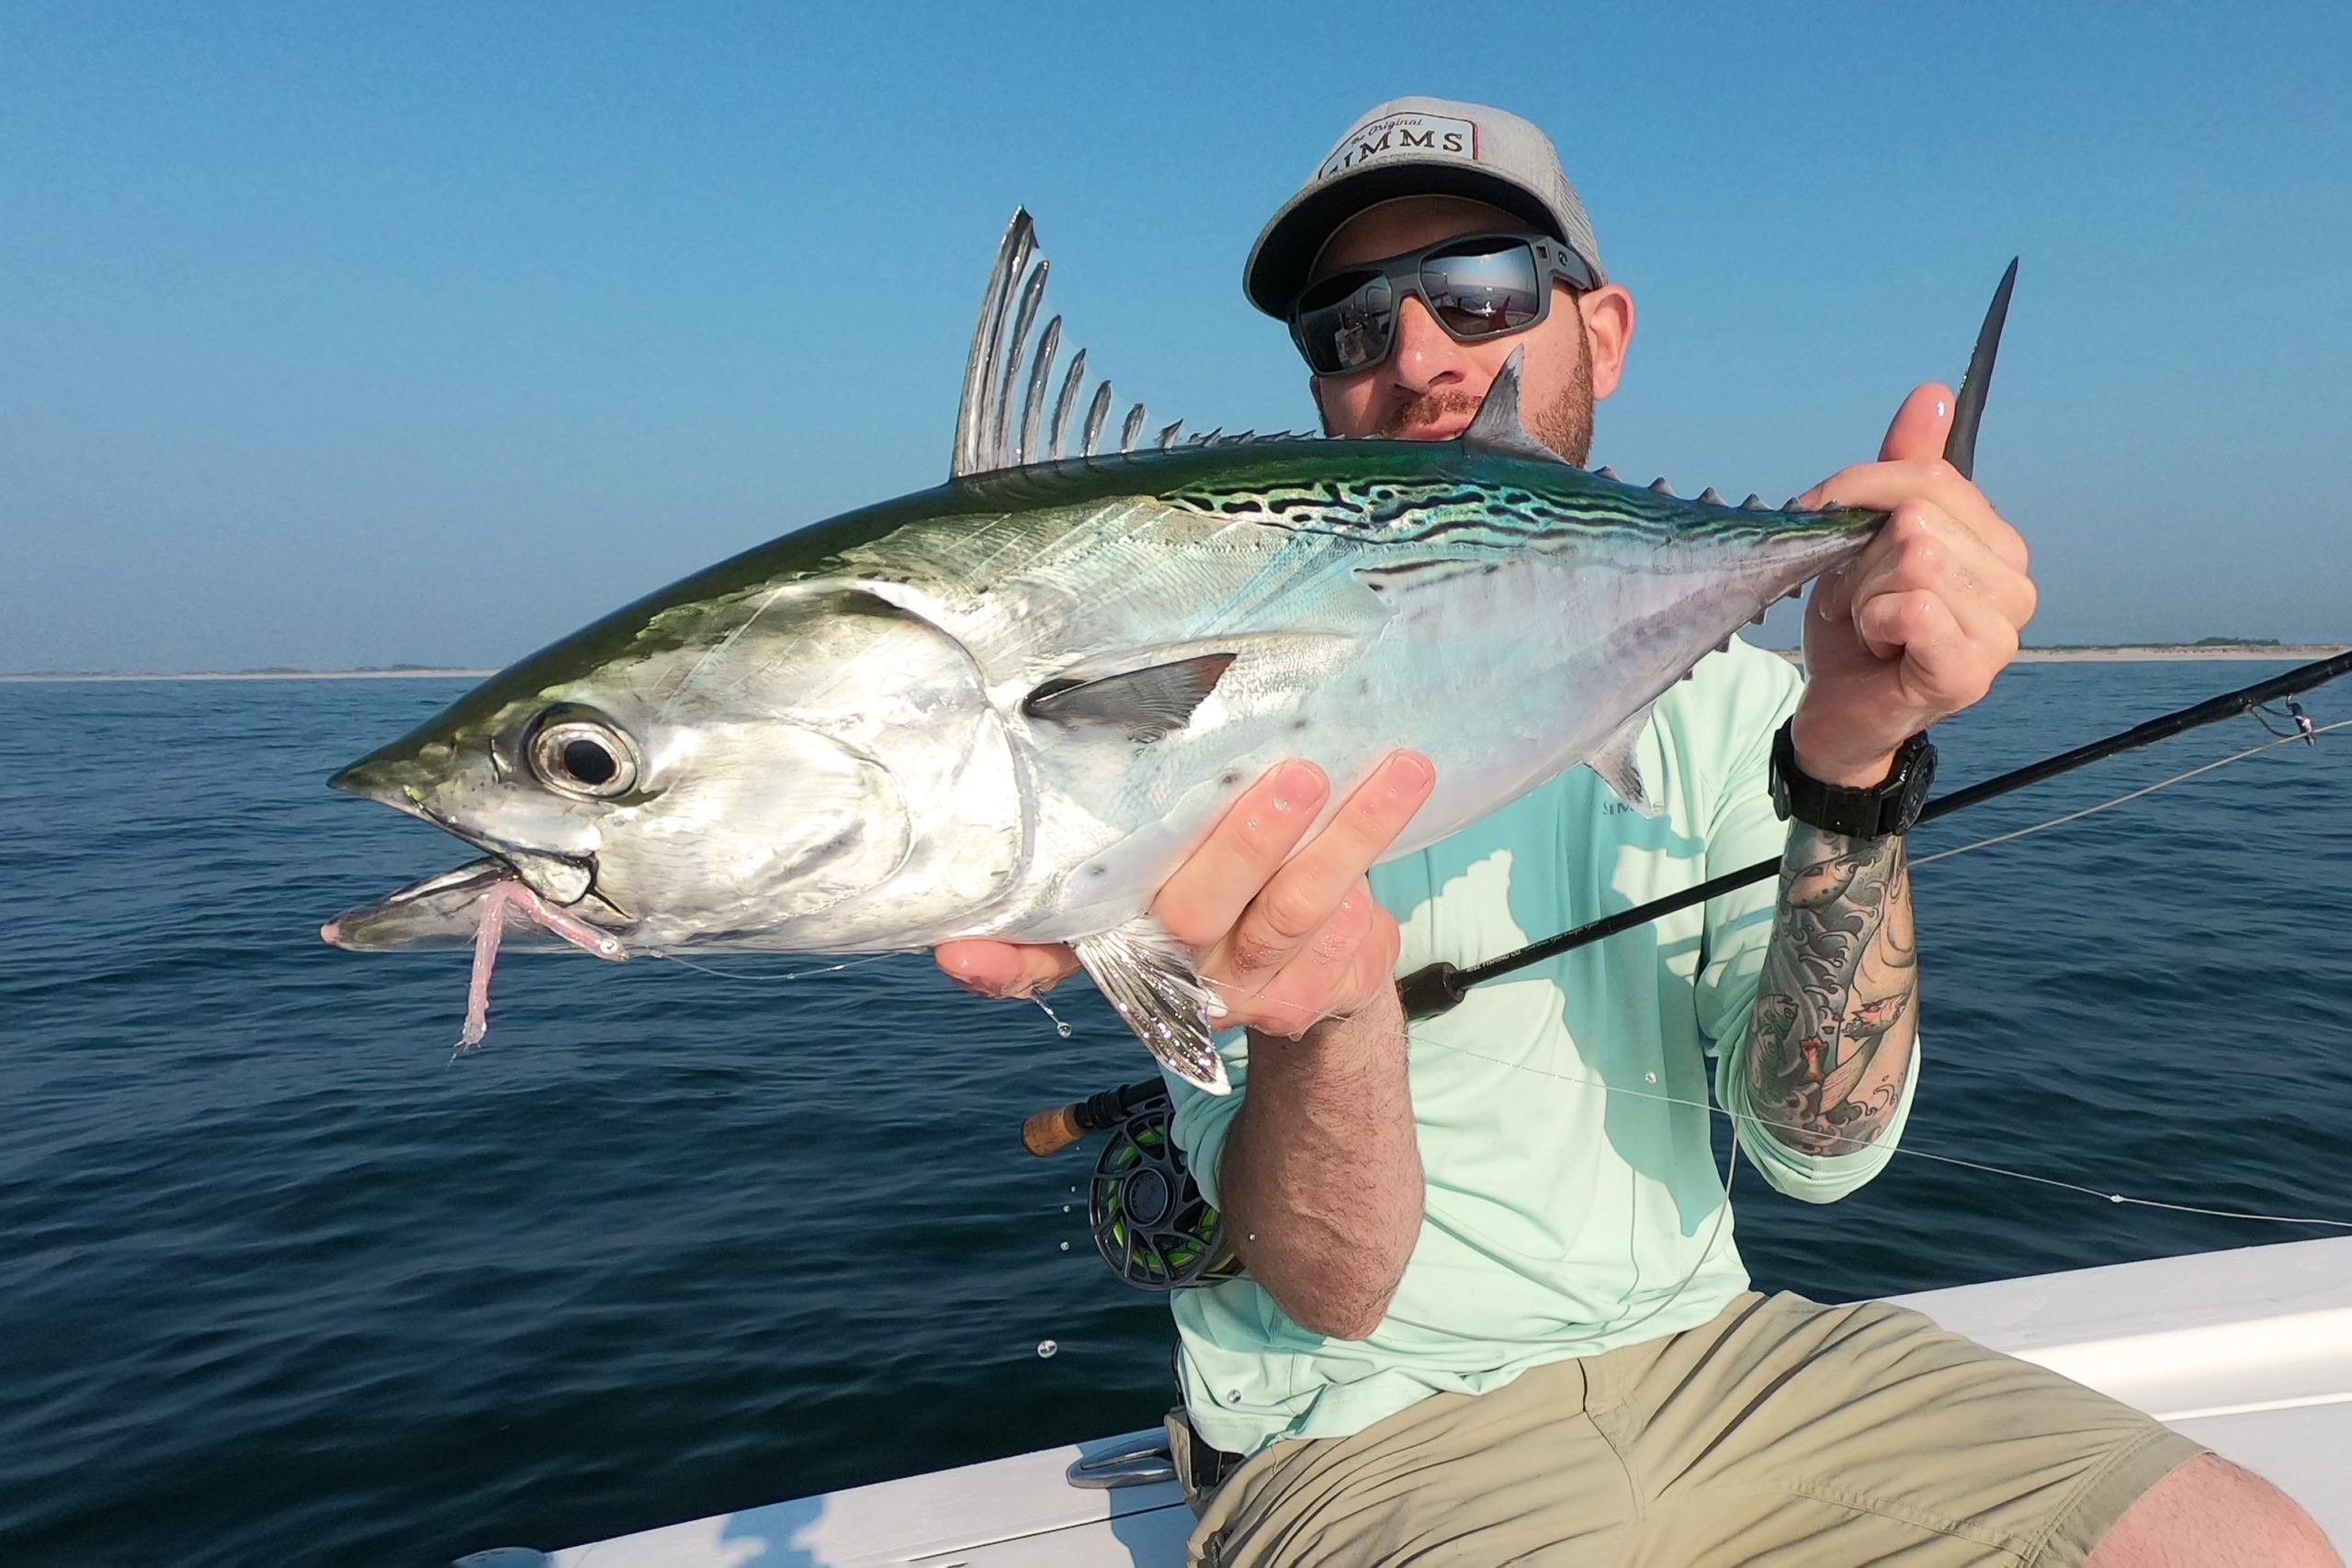 Jeff Lomonaco with the first false albacore landed off the South Fork this season.